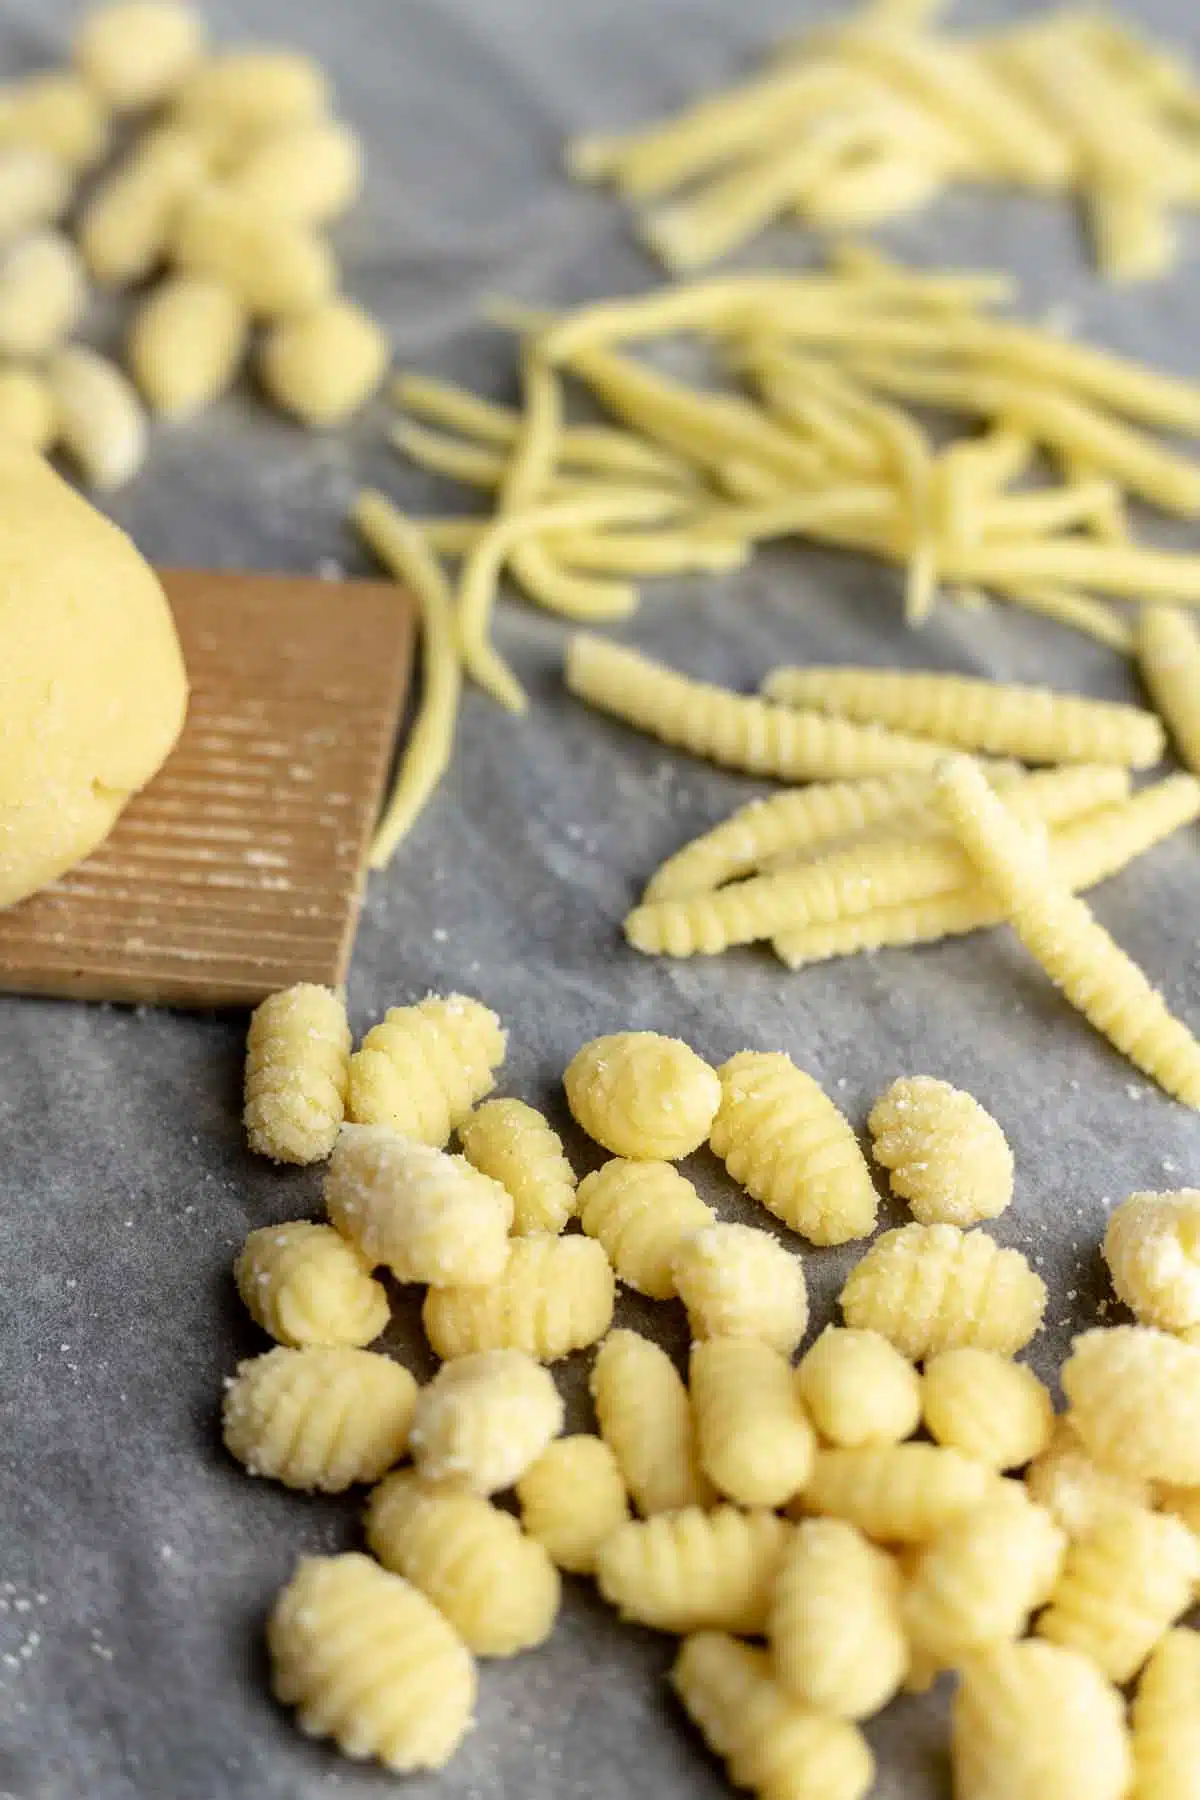 Keto & Gluten-Free Gnocchi formed into various shapes